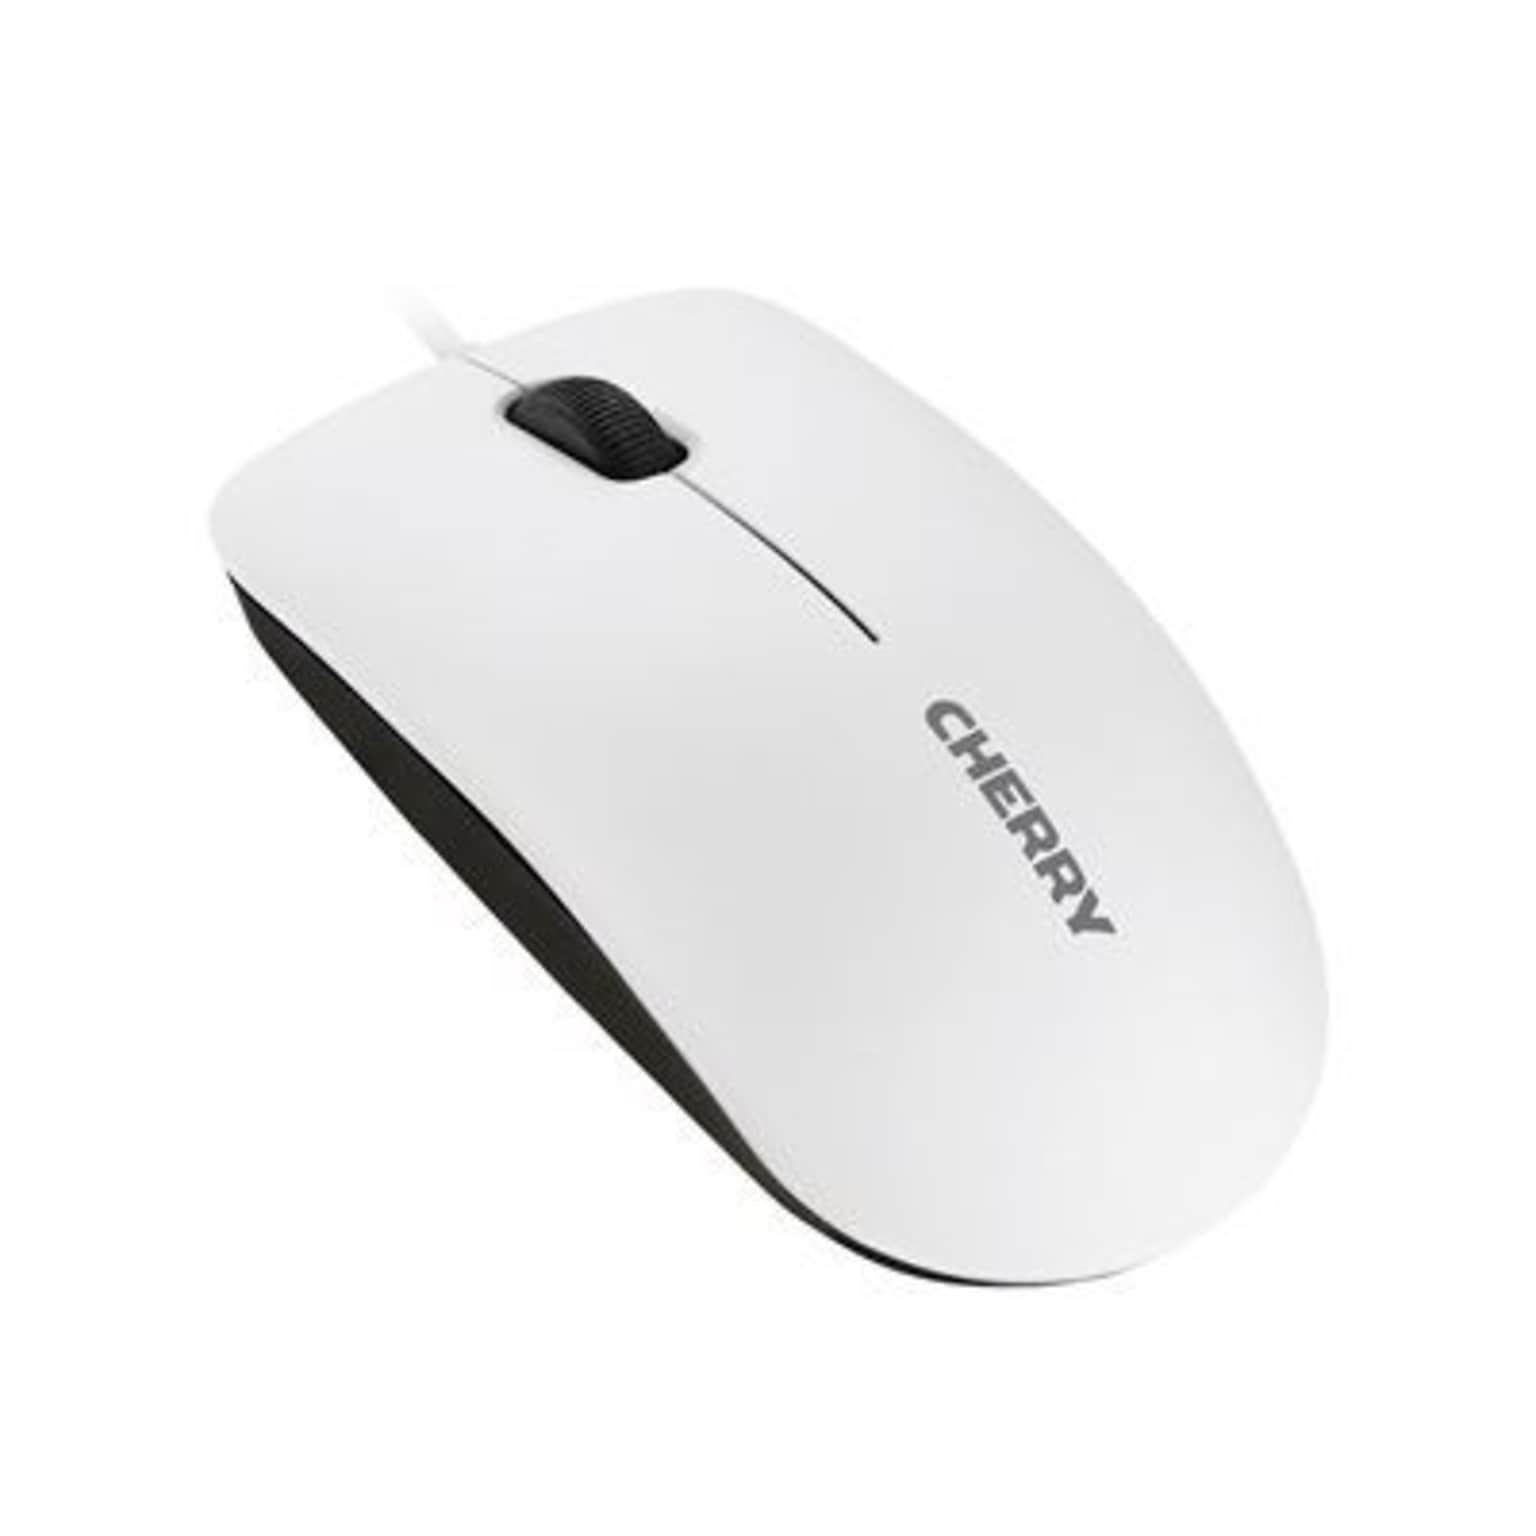 CHERRY MC 1000 USB 2.0 Wired Optical Mouse, White/Gray (JM-0800-0)